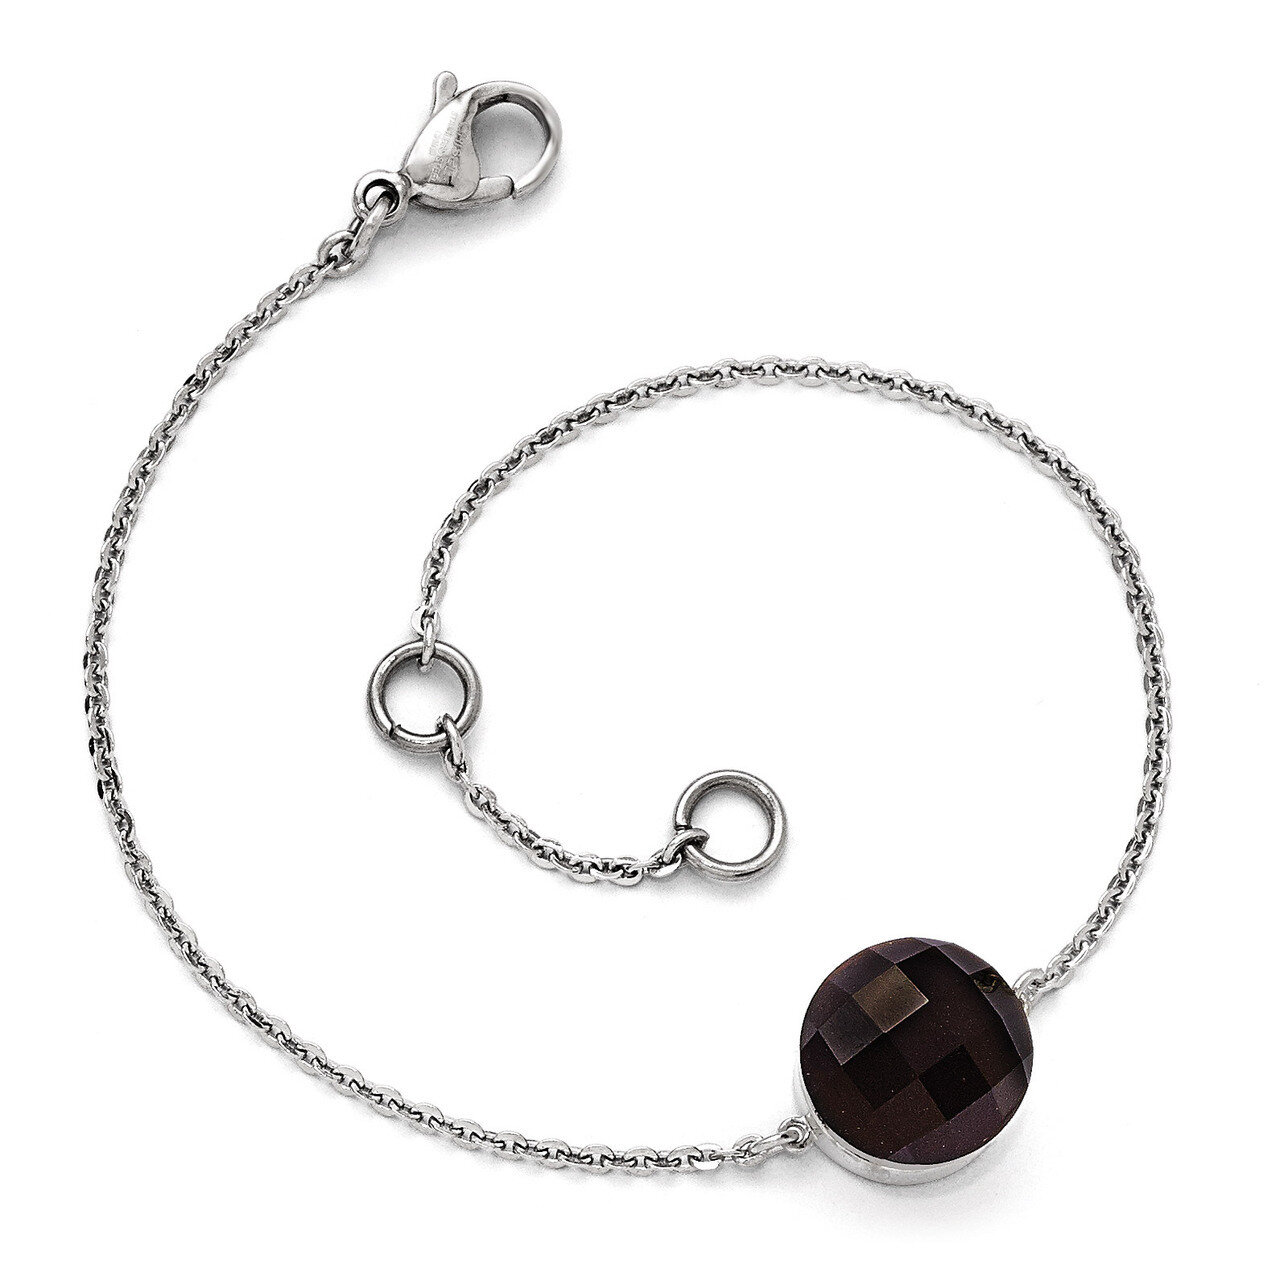 Polished Dark Brown Glass with 1 Inch Extension Bracelet - Stainless Steel SRB1605-7